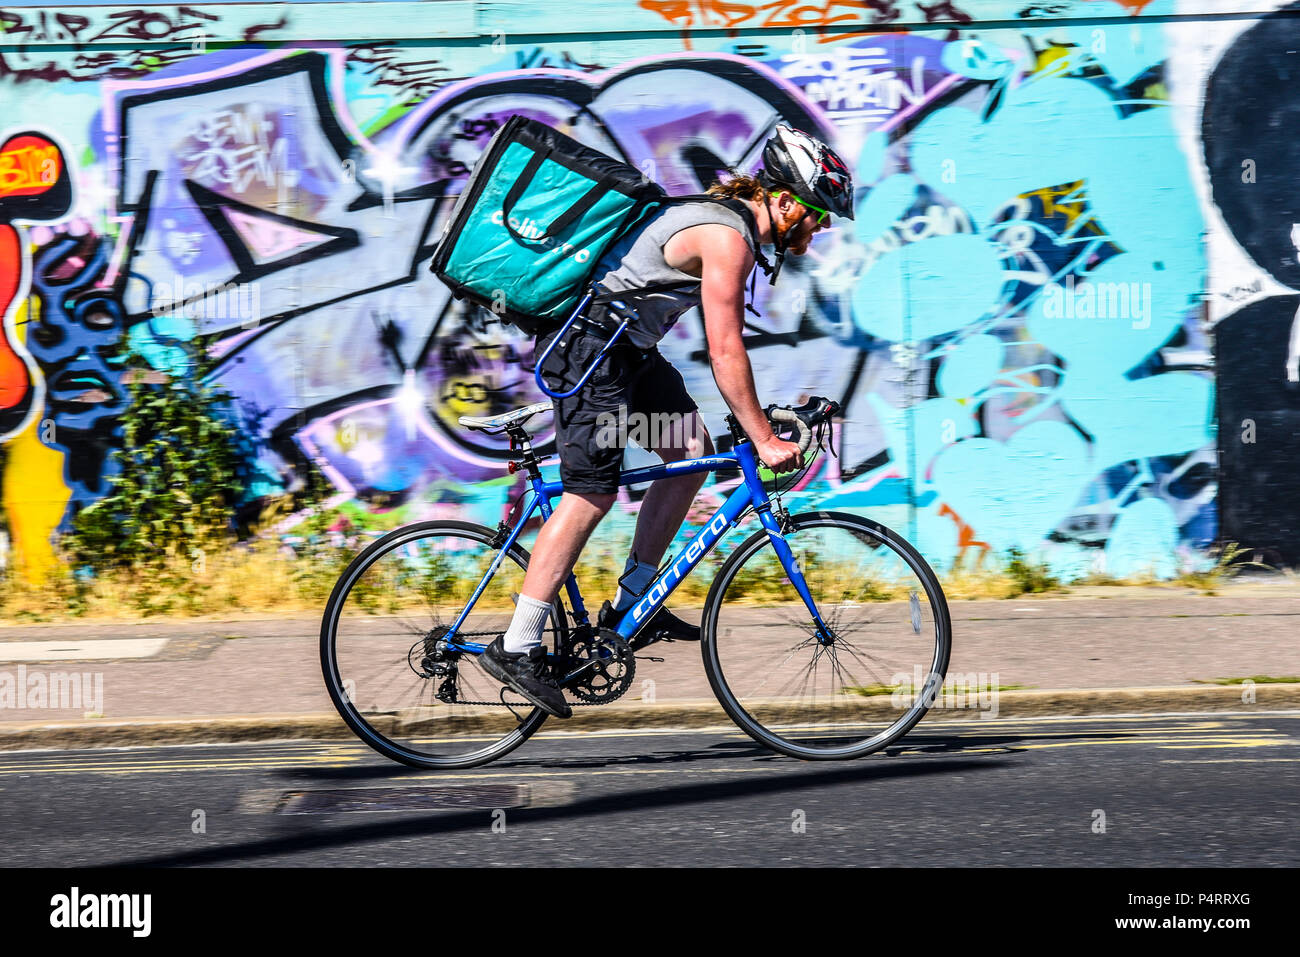 Deliveroo bicycle delivery rider struggling in the heat, riding past bright graffiti in Southend on Sea, Essex, UK. Cyclist take away food delivery Stock Photo